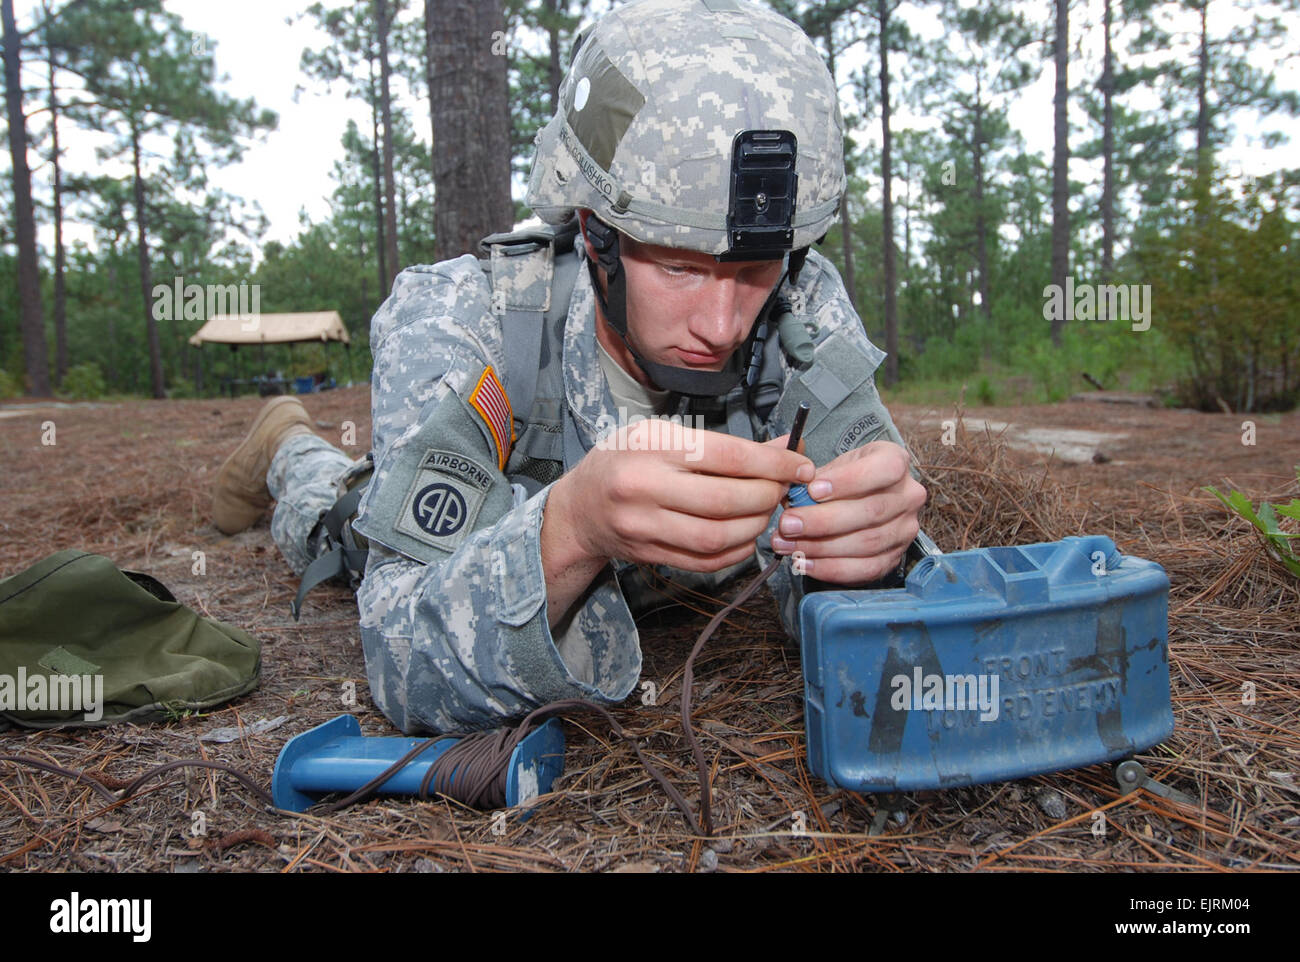 Spc. Gleb Golushko, of Company B, 2nd Battalion, 325th Airborne Infantry Regiment, 2nd Brigade Combat Team, 82nd Airborne Division, emplaces an M18A1 Claymore Mine during Expert Infantryman Badge training at Fort Bragg Sep. 15.   Staff Sgt. Mike Pryor, 2nd BCT, 82nd Abn. Div. Public Affairs Stock Photo